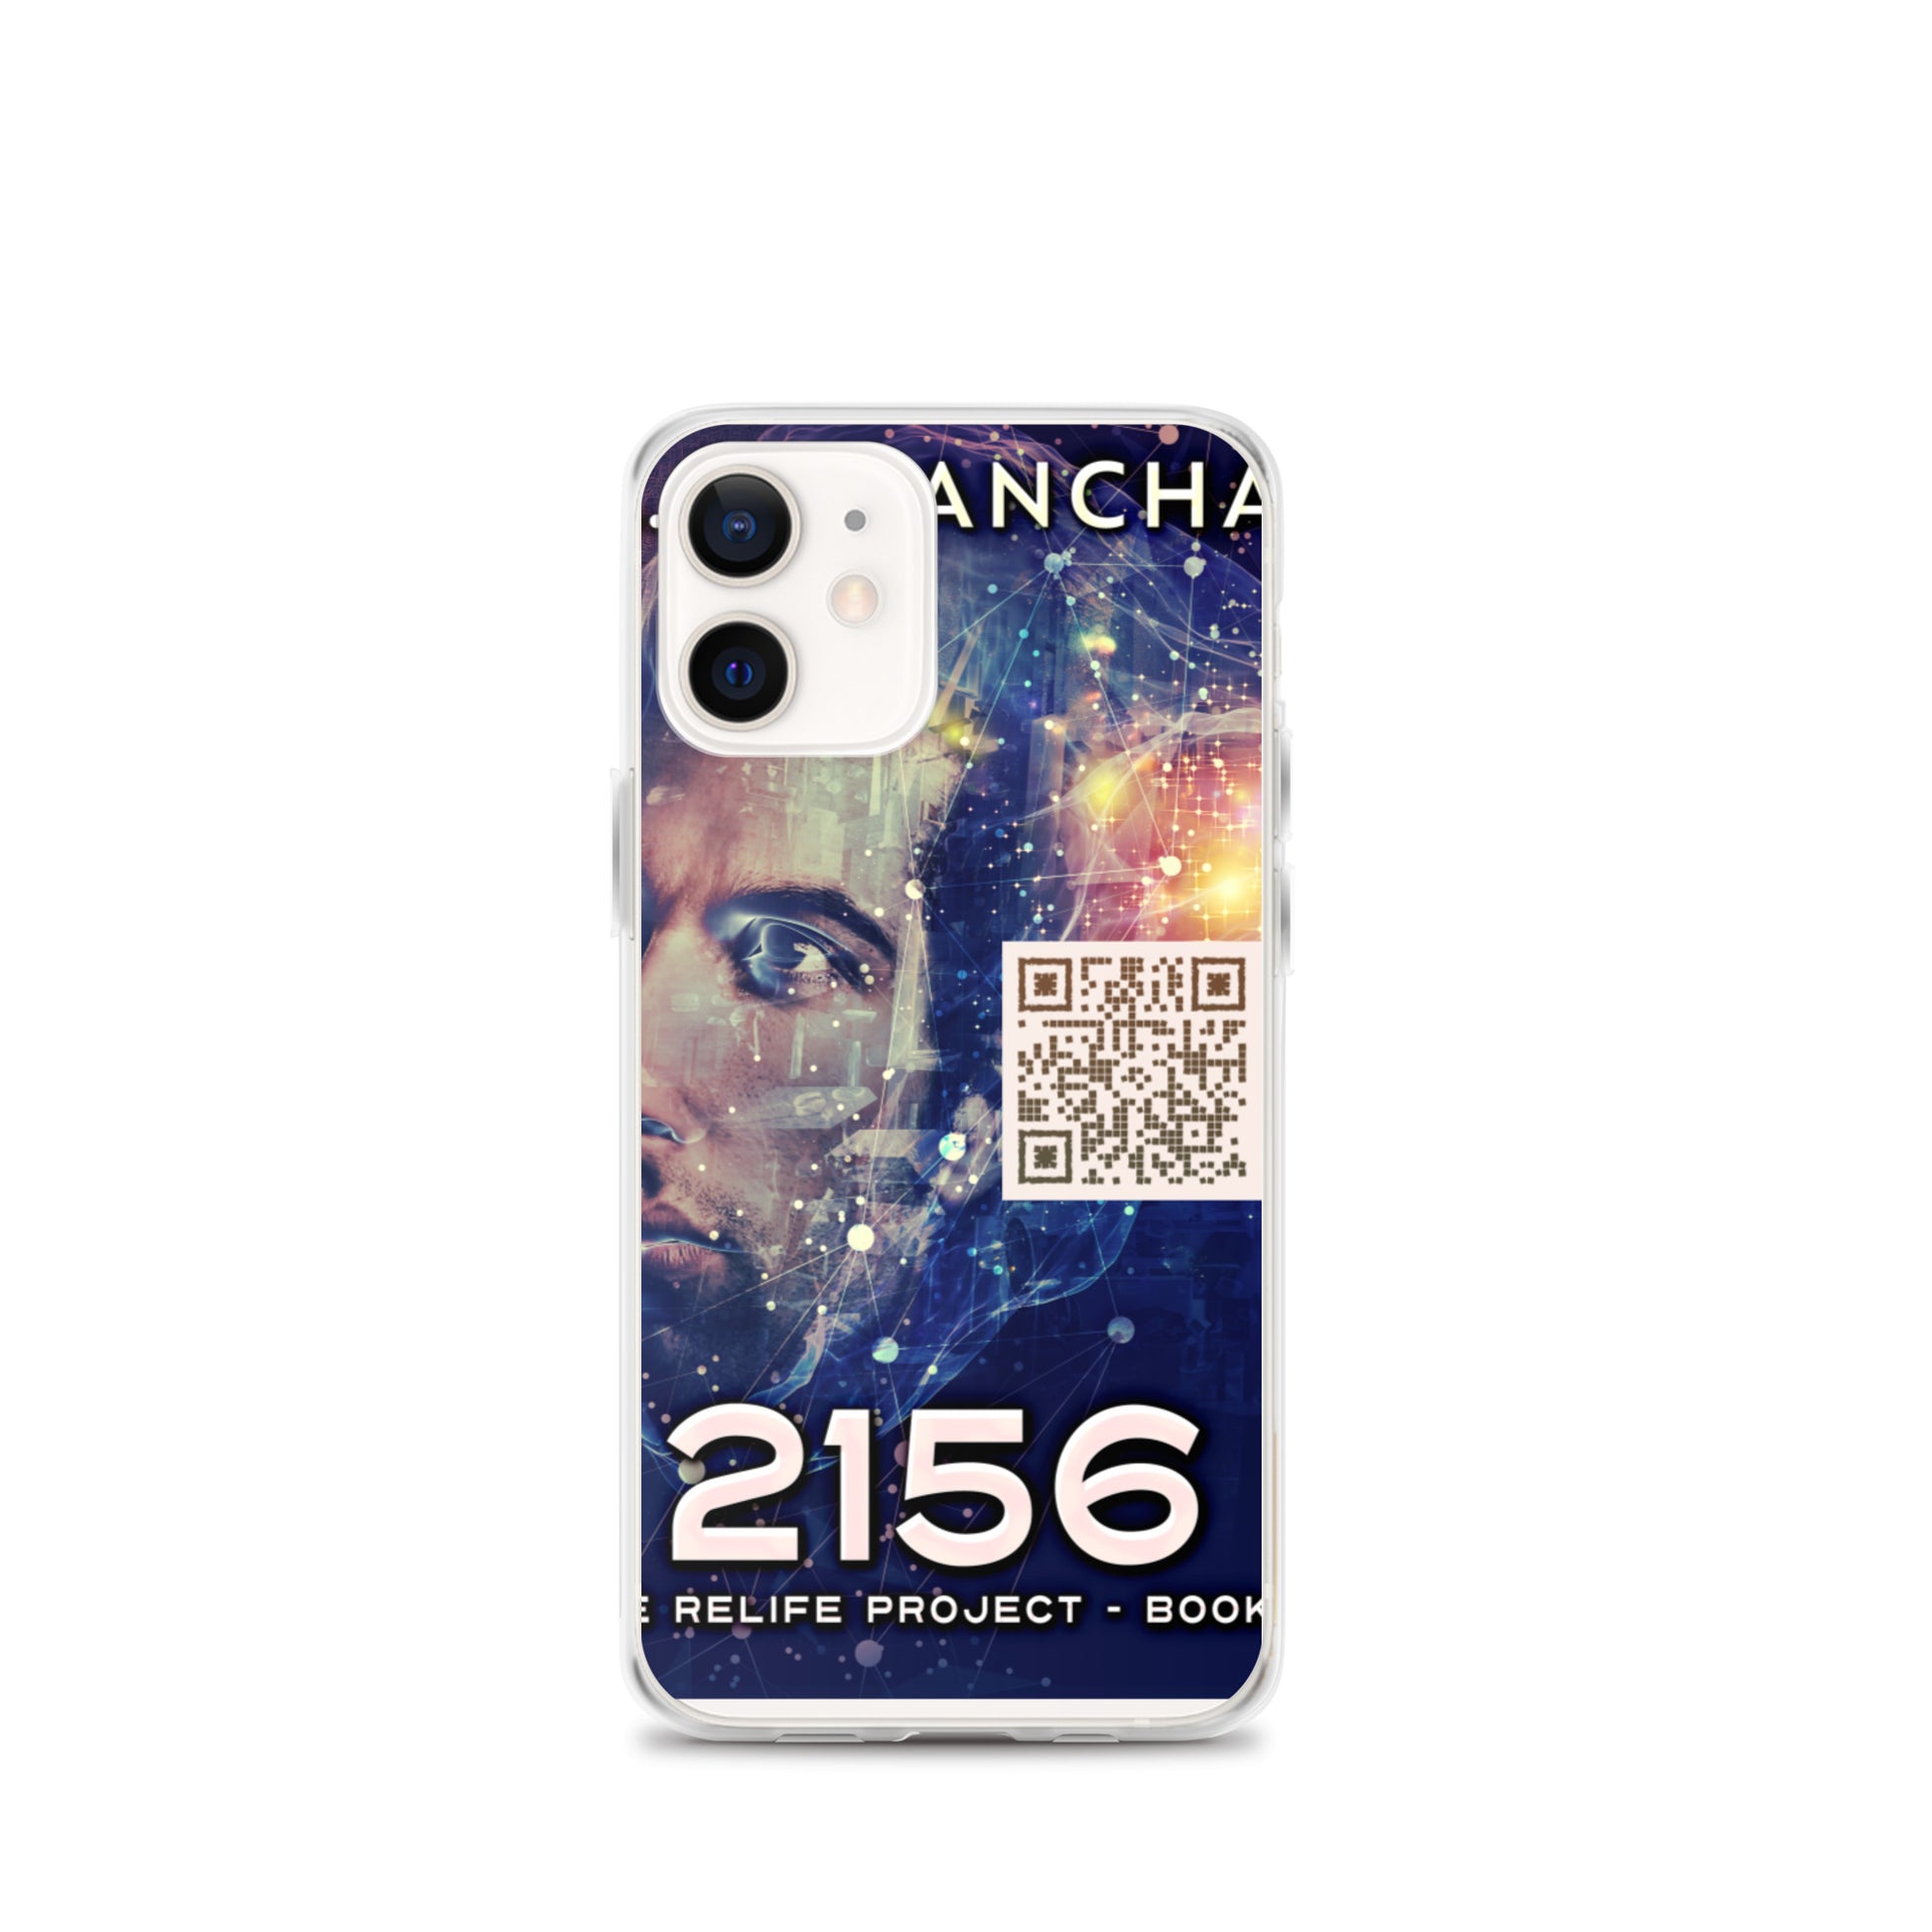 iphone case with cover of C.M. Dancha’s book 2156